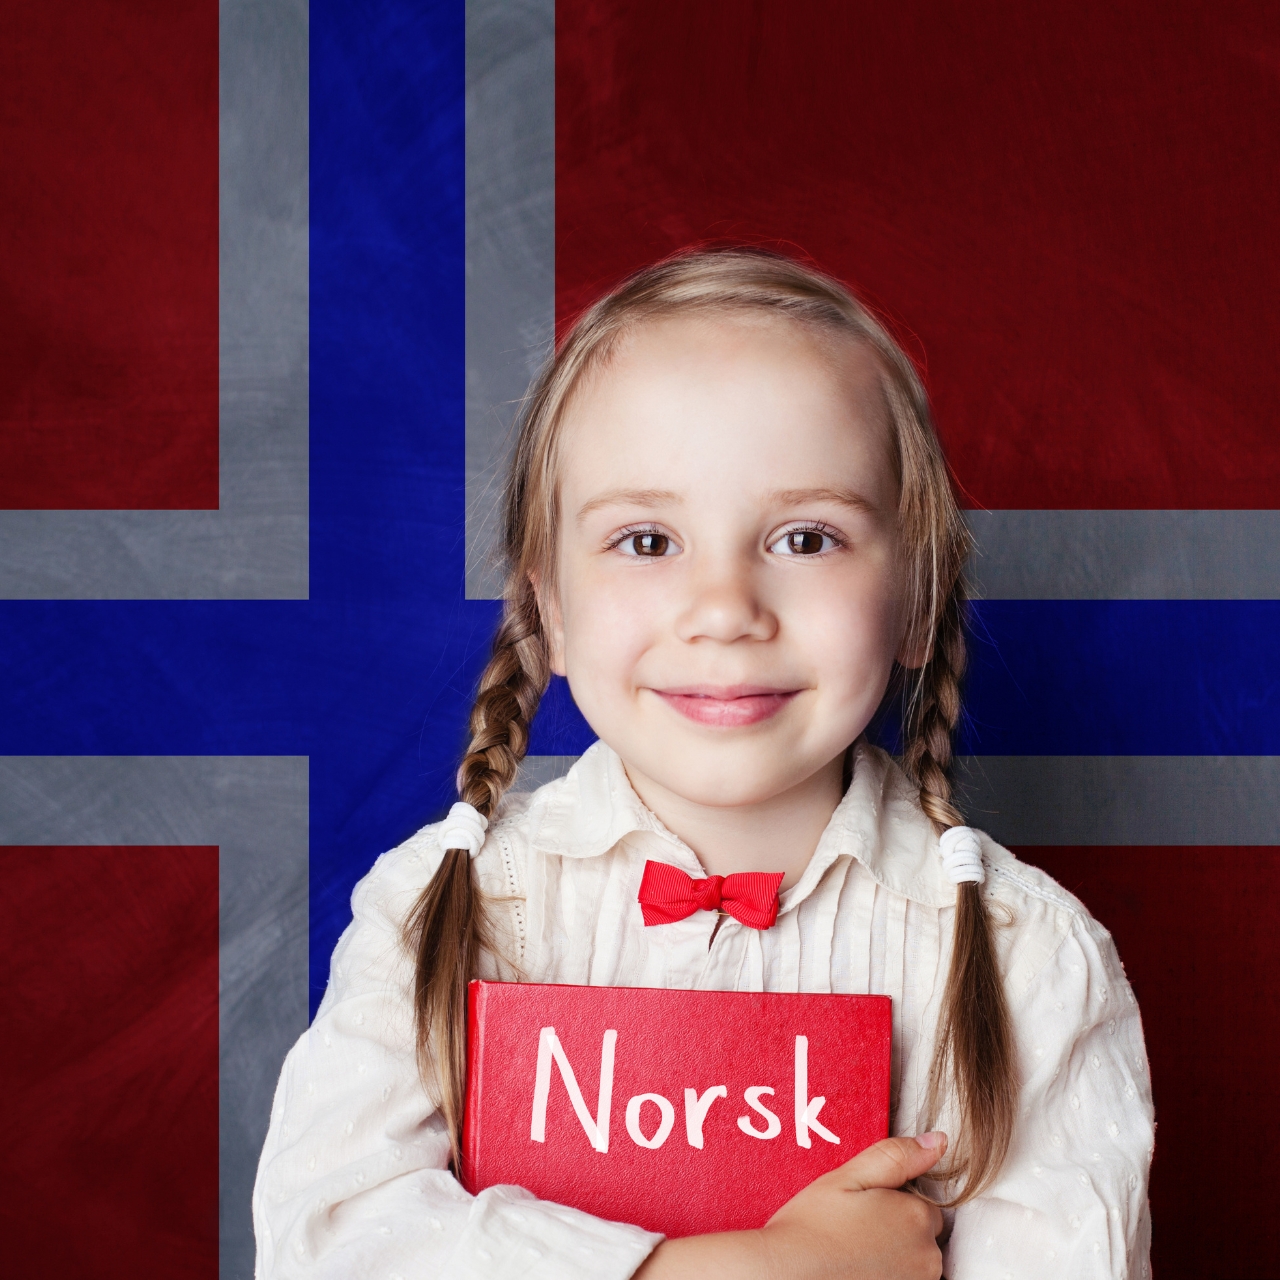 girl holding red book with norsk title against a norwegian flag